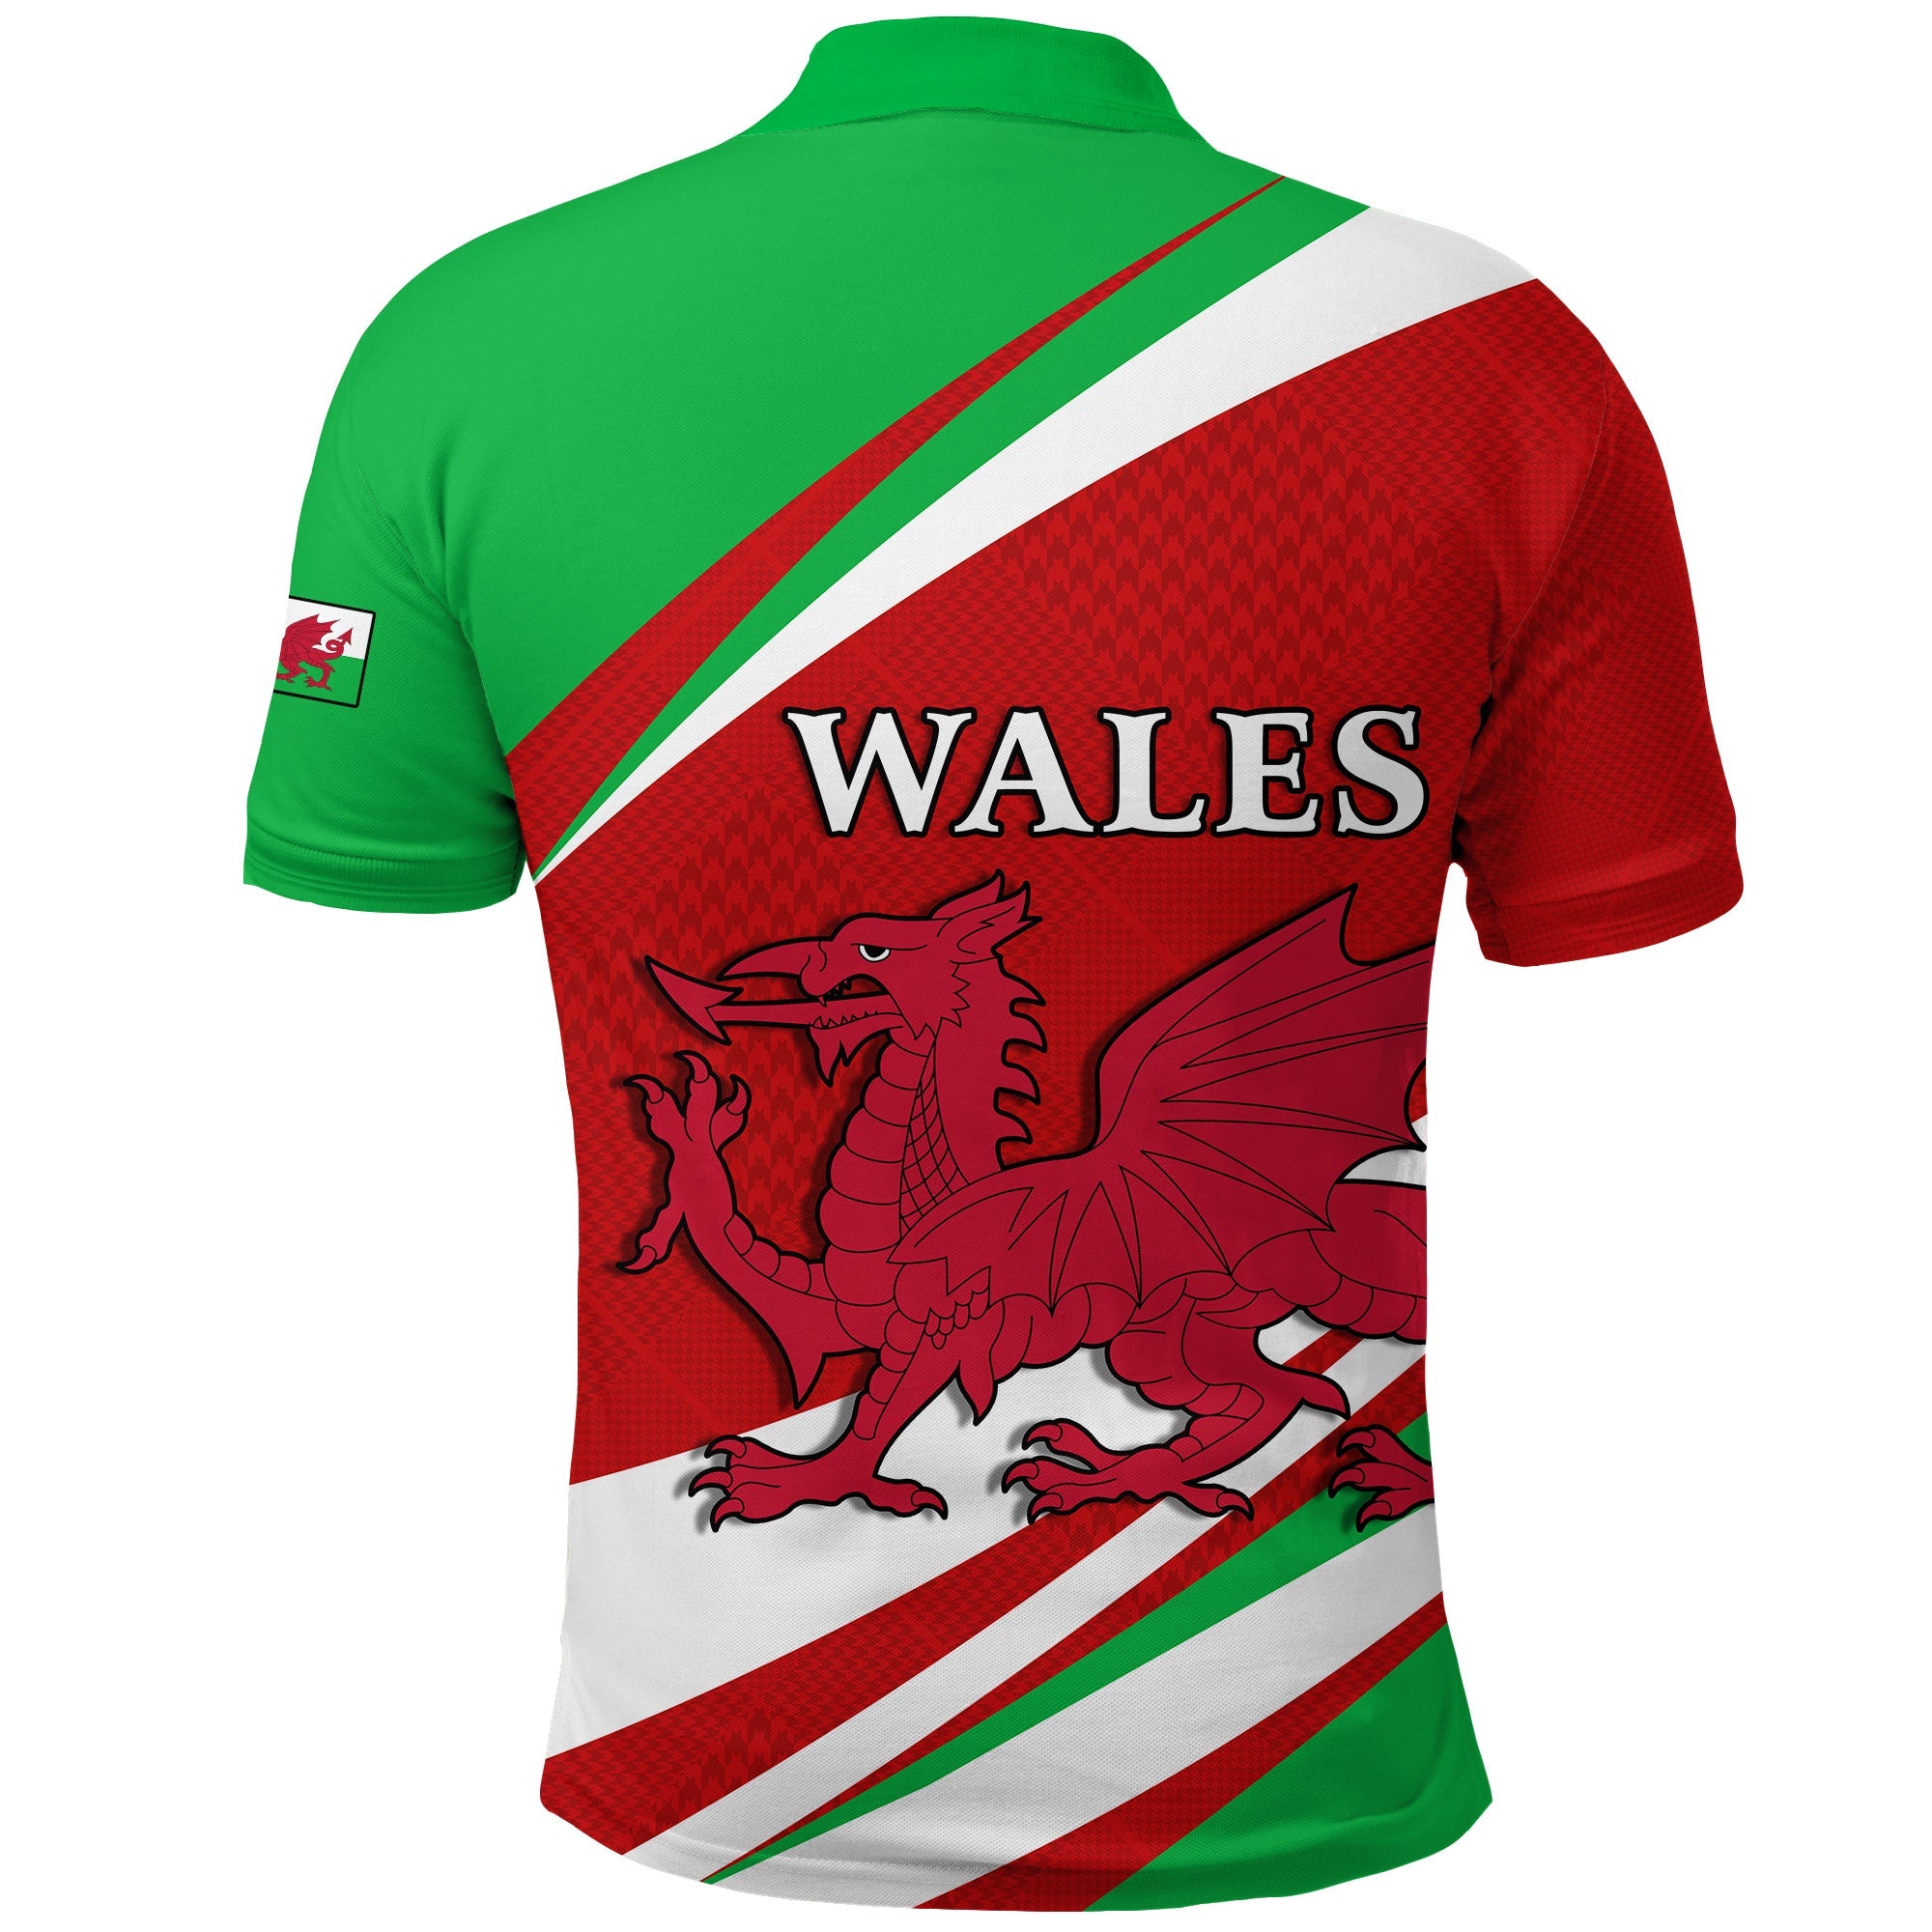 wales-rugby-2021-polo-shirt-mix-pattern-six-nations